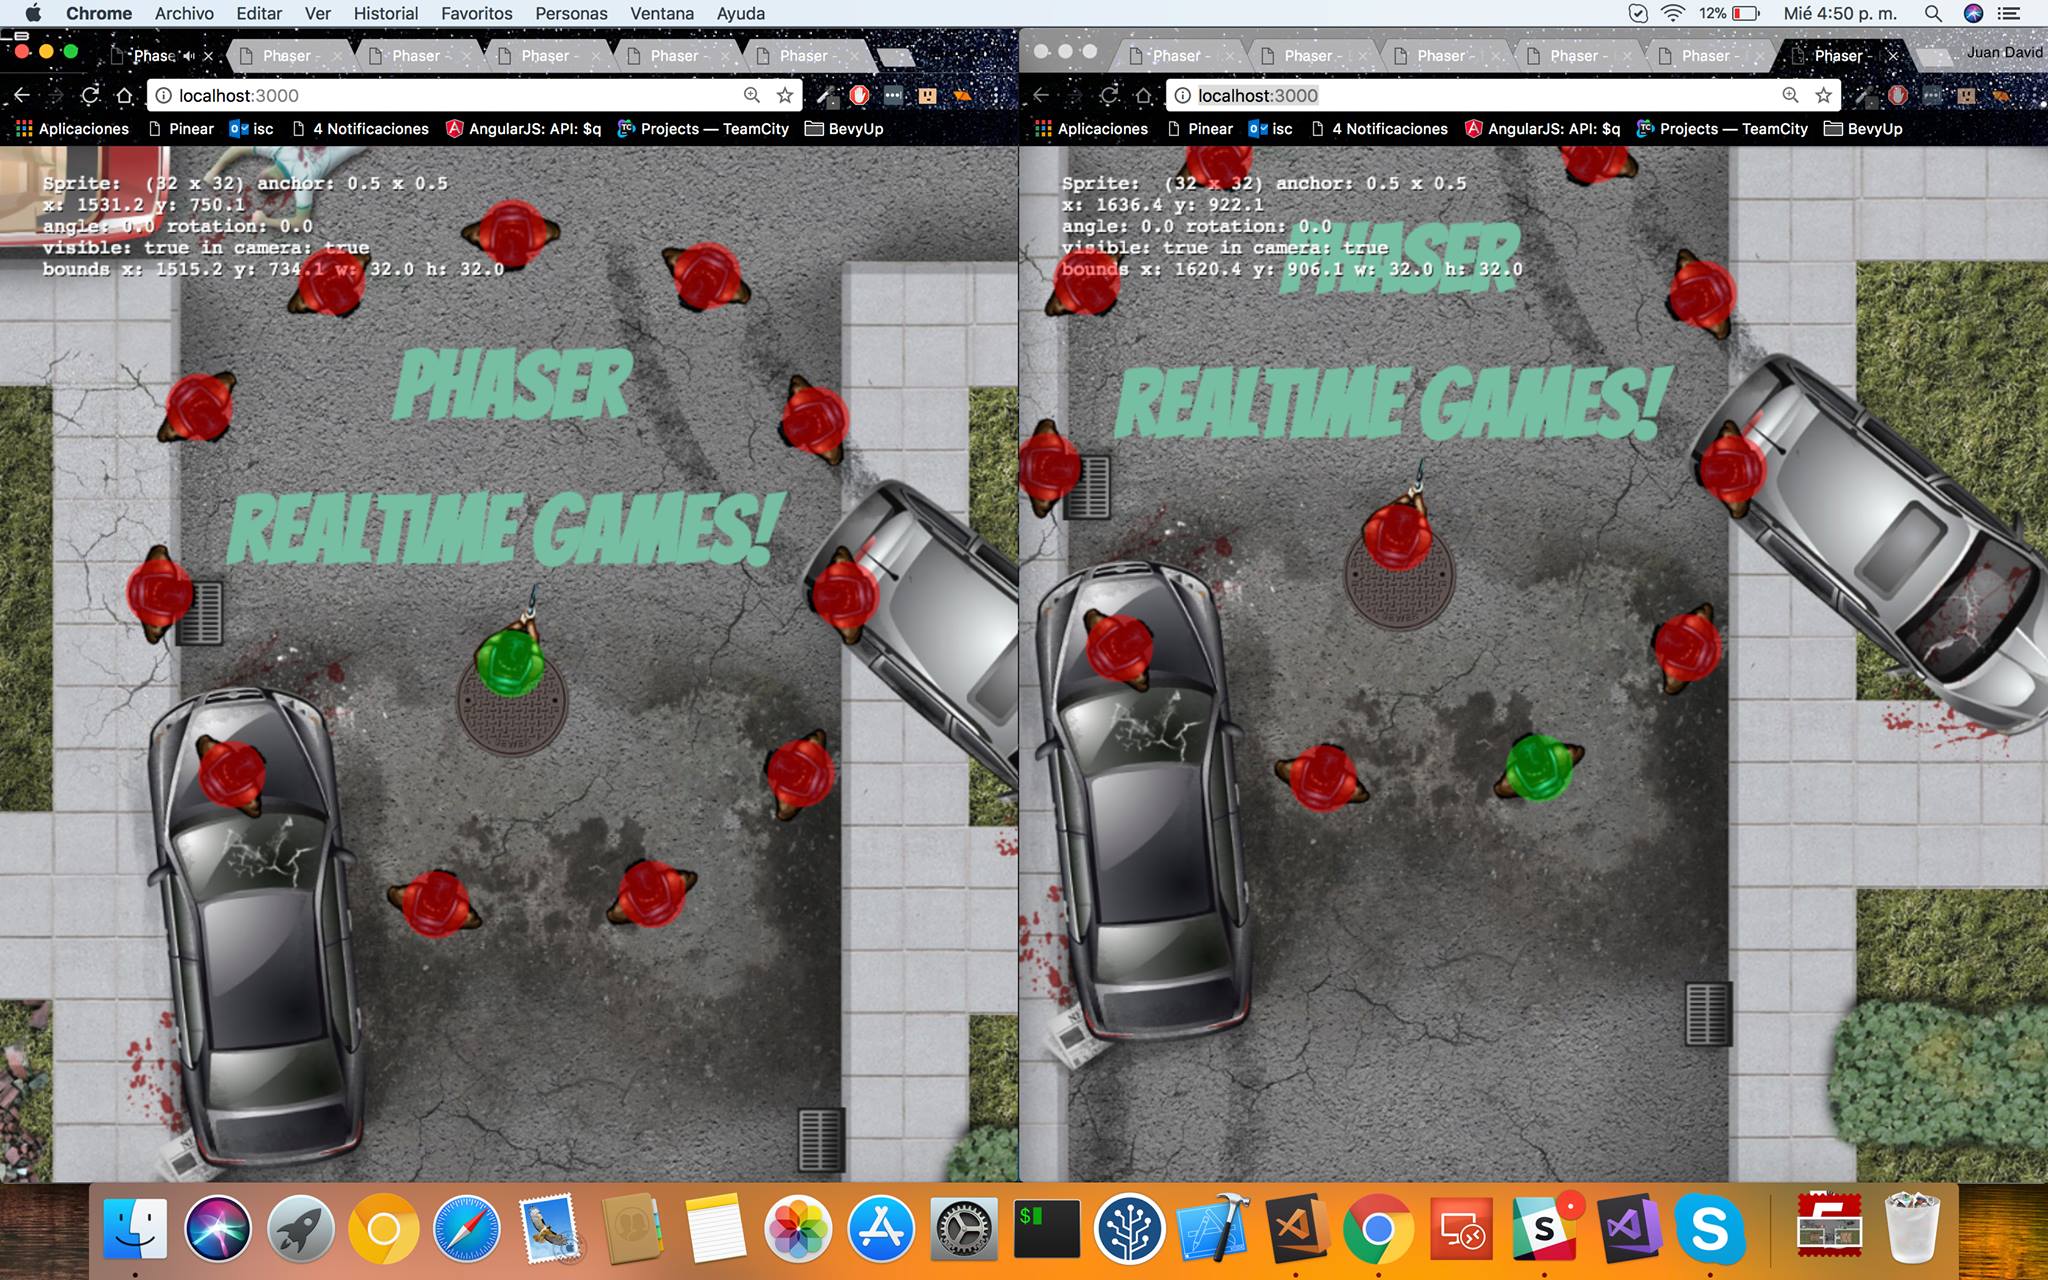 Phaser Real-time games!